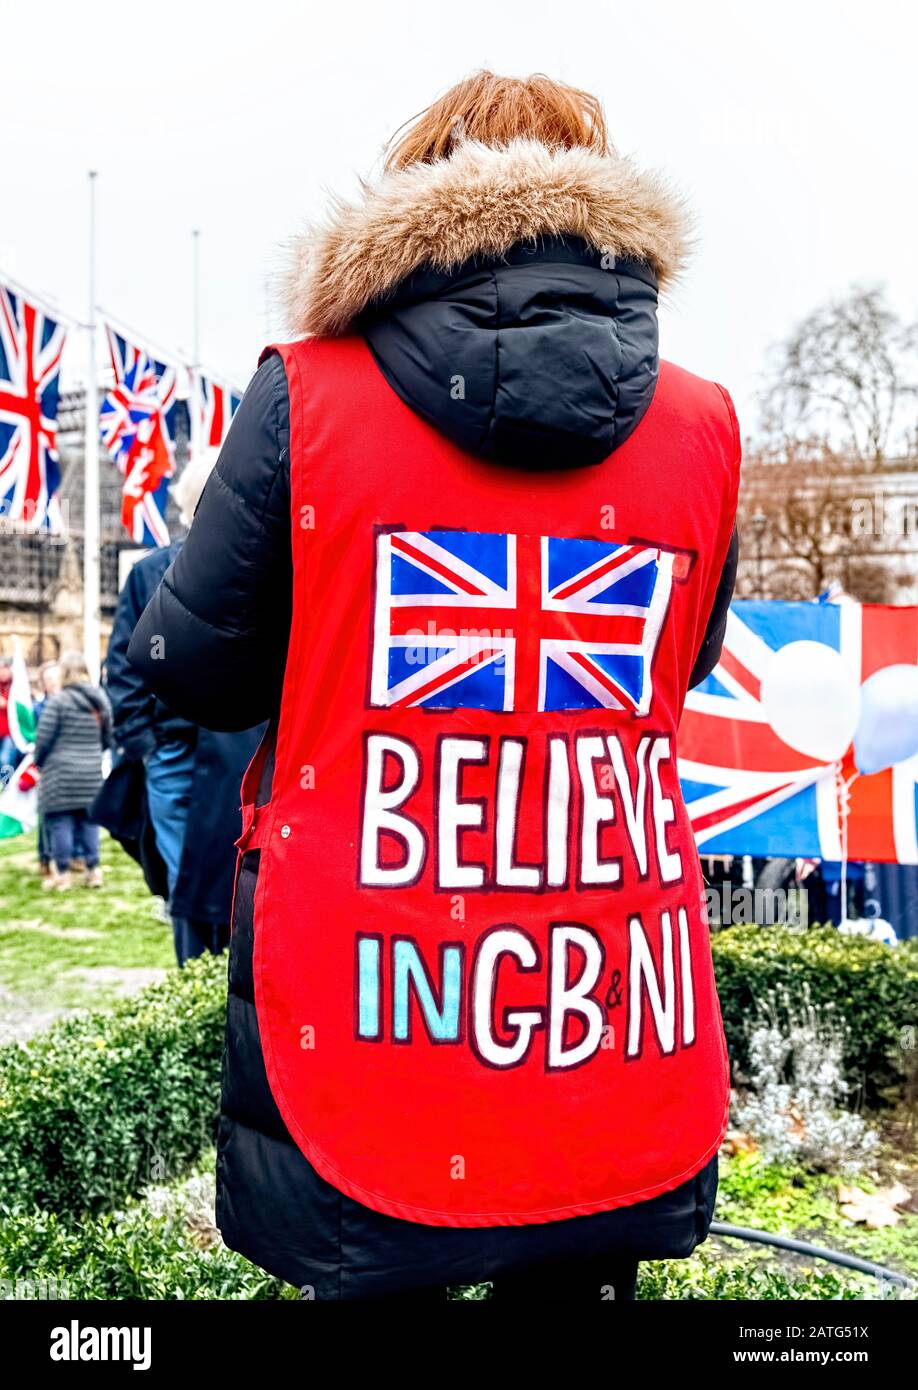 Brexit celebrations 31st January 2020 in Whitehall and Parliament Square, London UK - Brexeteers wearing Union Jack clothing Believe in GB and NI Stock Photo